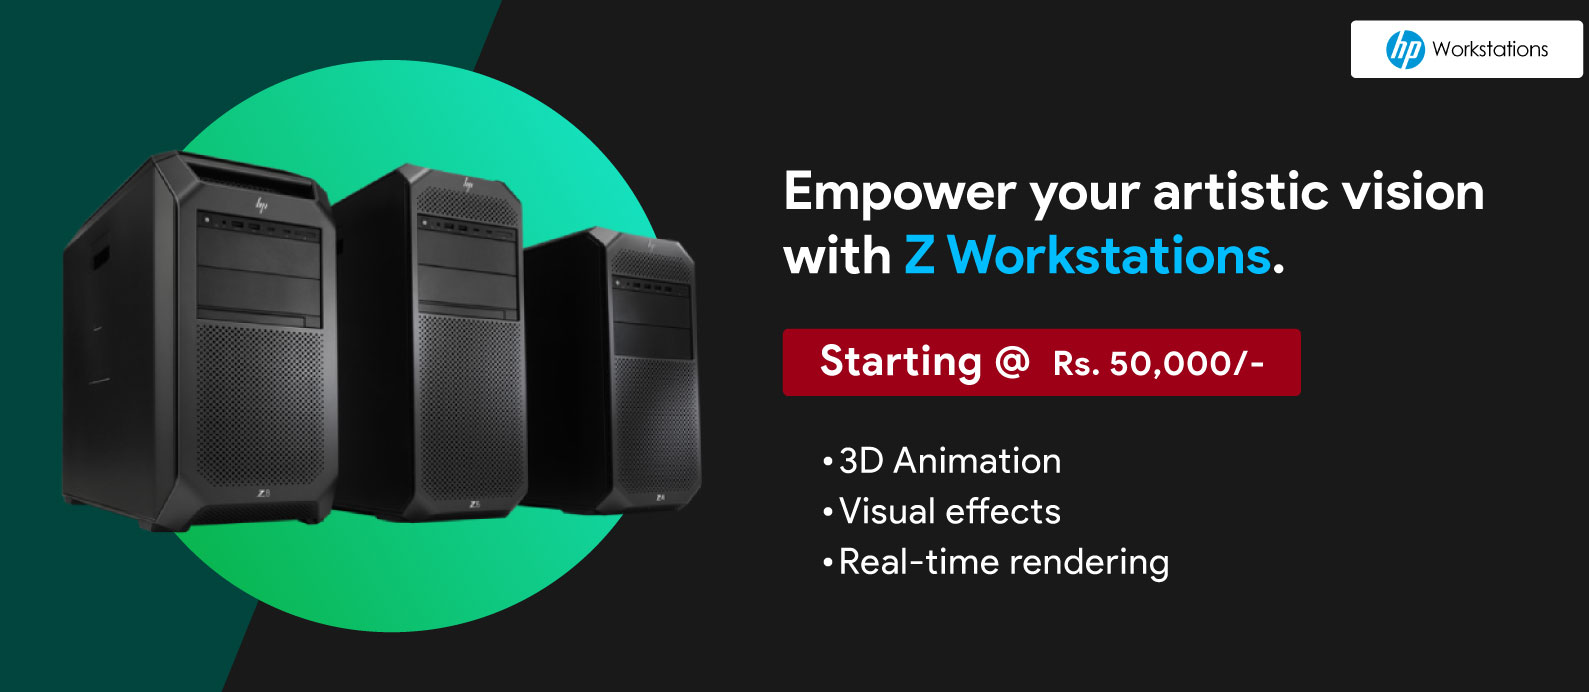 HP Z Series Workstations